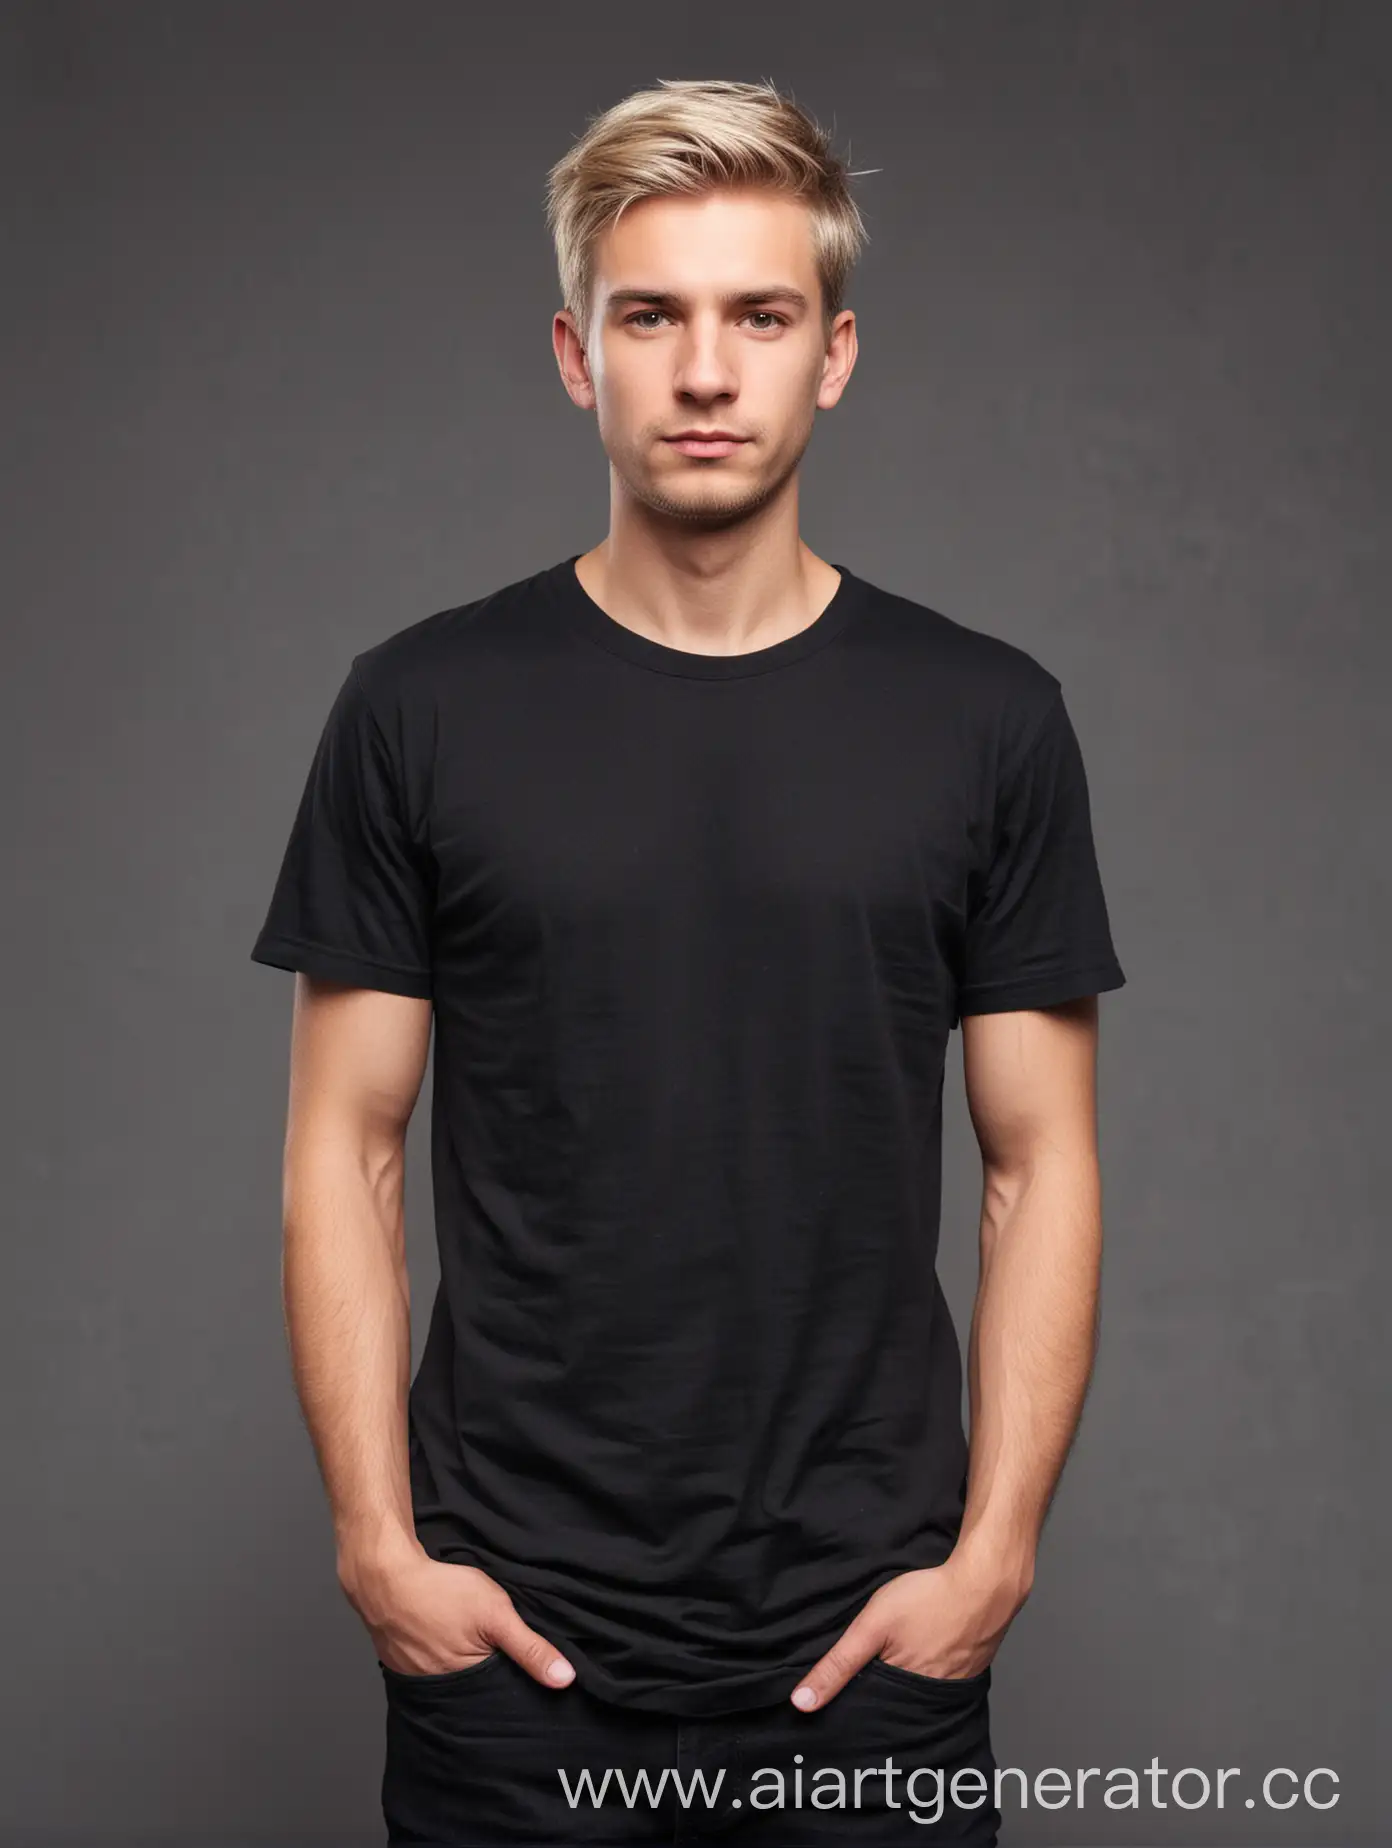 Young-Man-in-Black-TShirt-Standing-on-Grey-Background